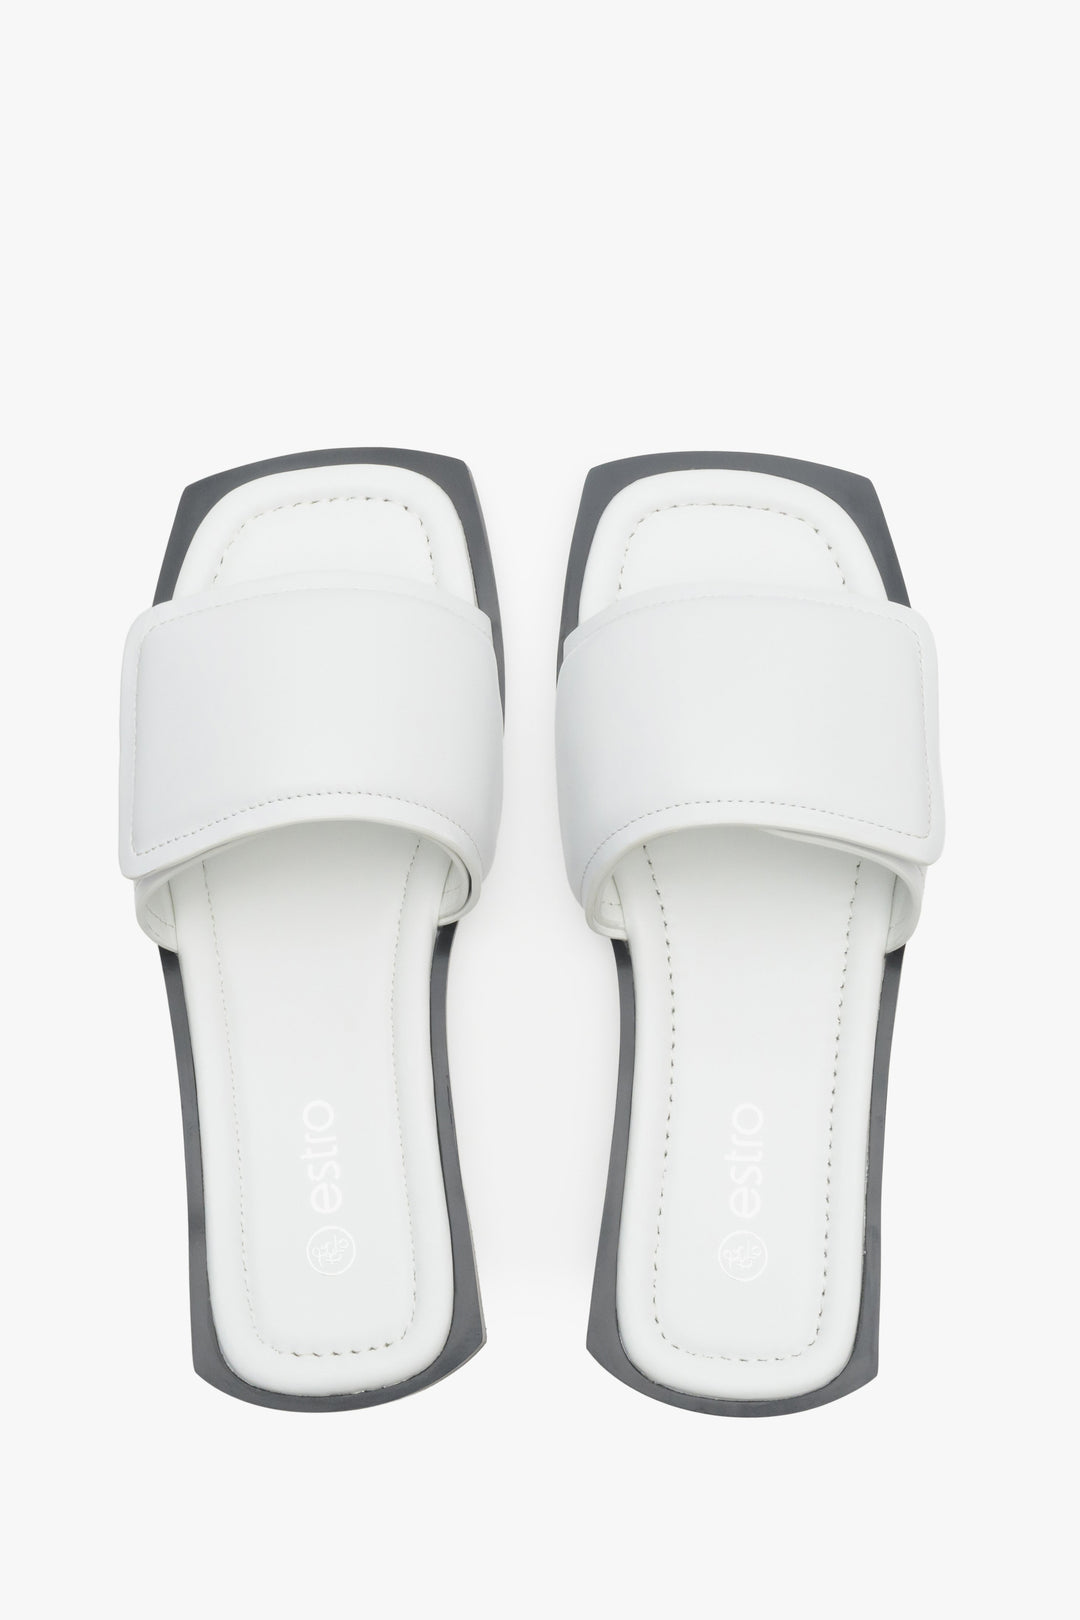 Genuine leather flat slide sandals Estro in white - presentation from above.